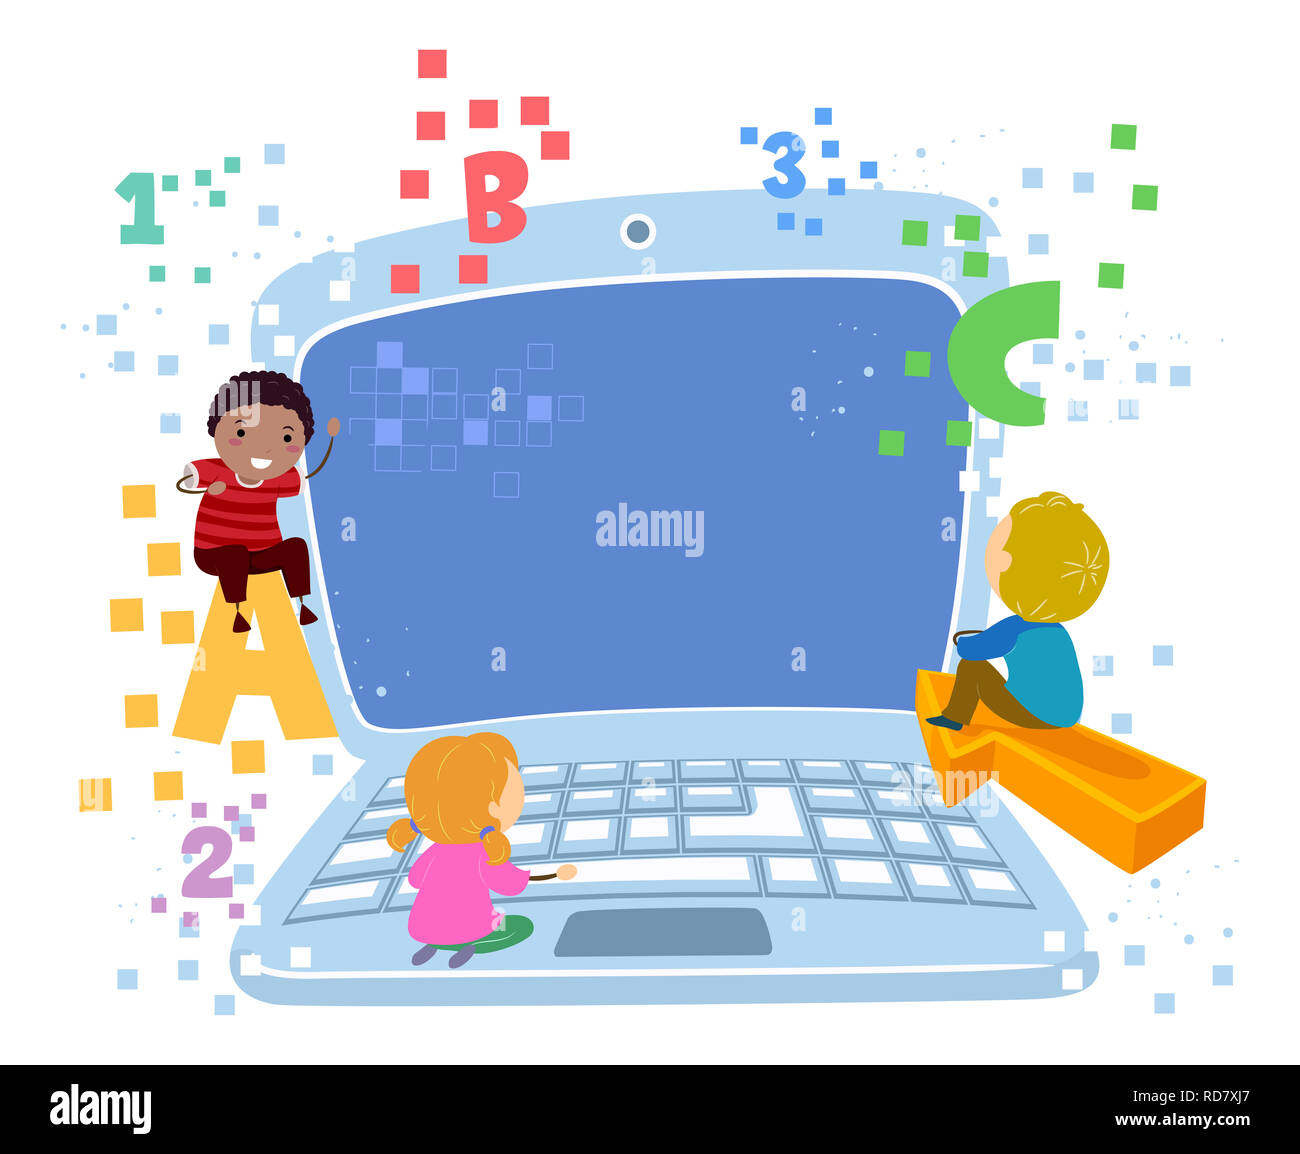 Illustration of Stickman Kids with Laptop, ABC, 123 and Pixels Stock Photo  - Alamy